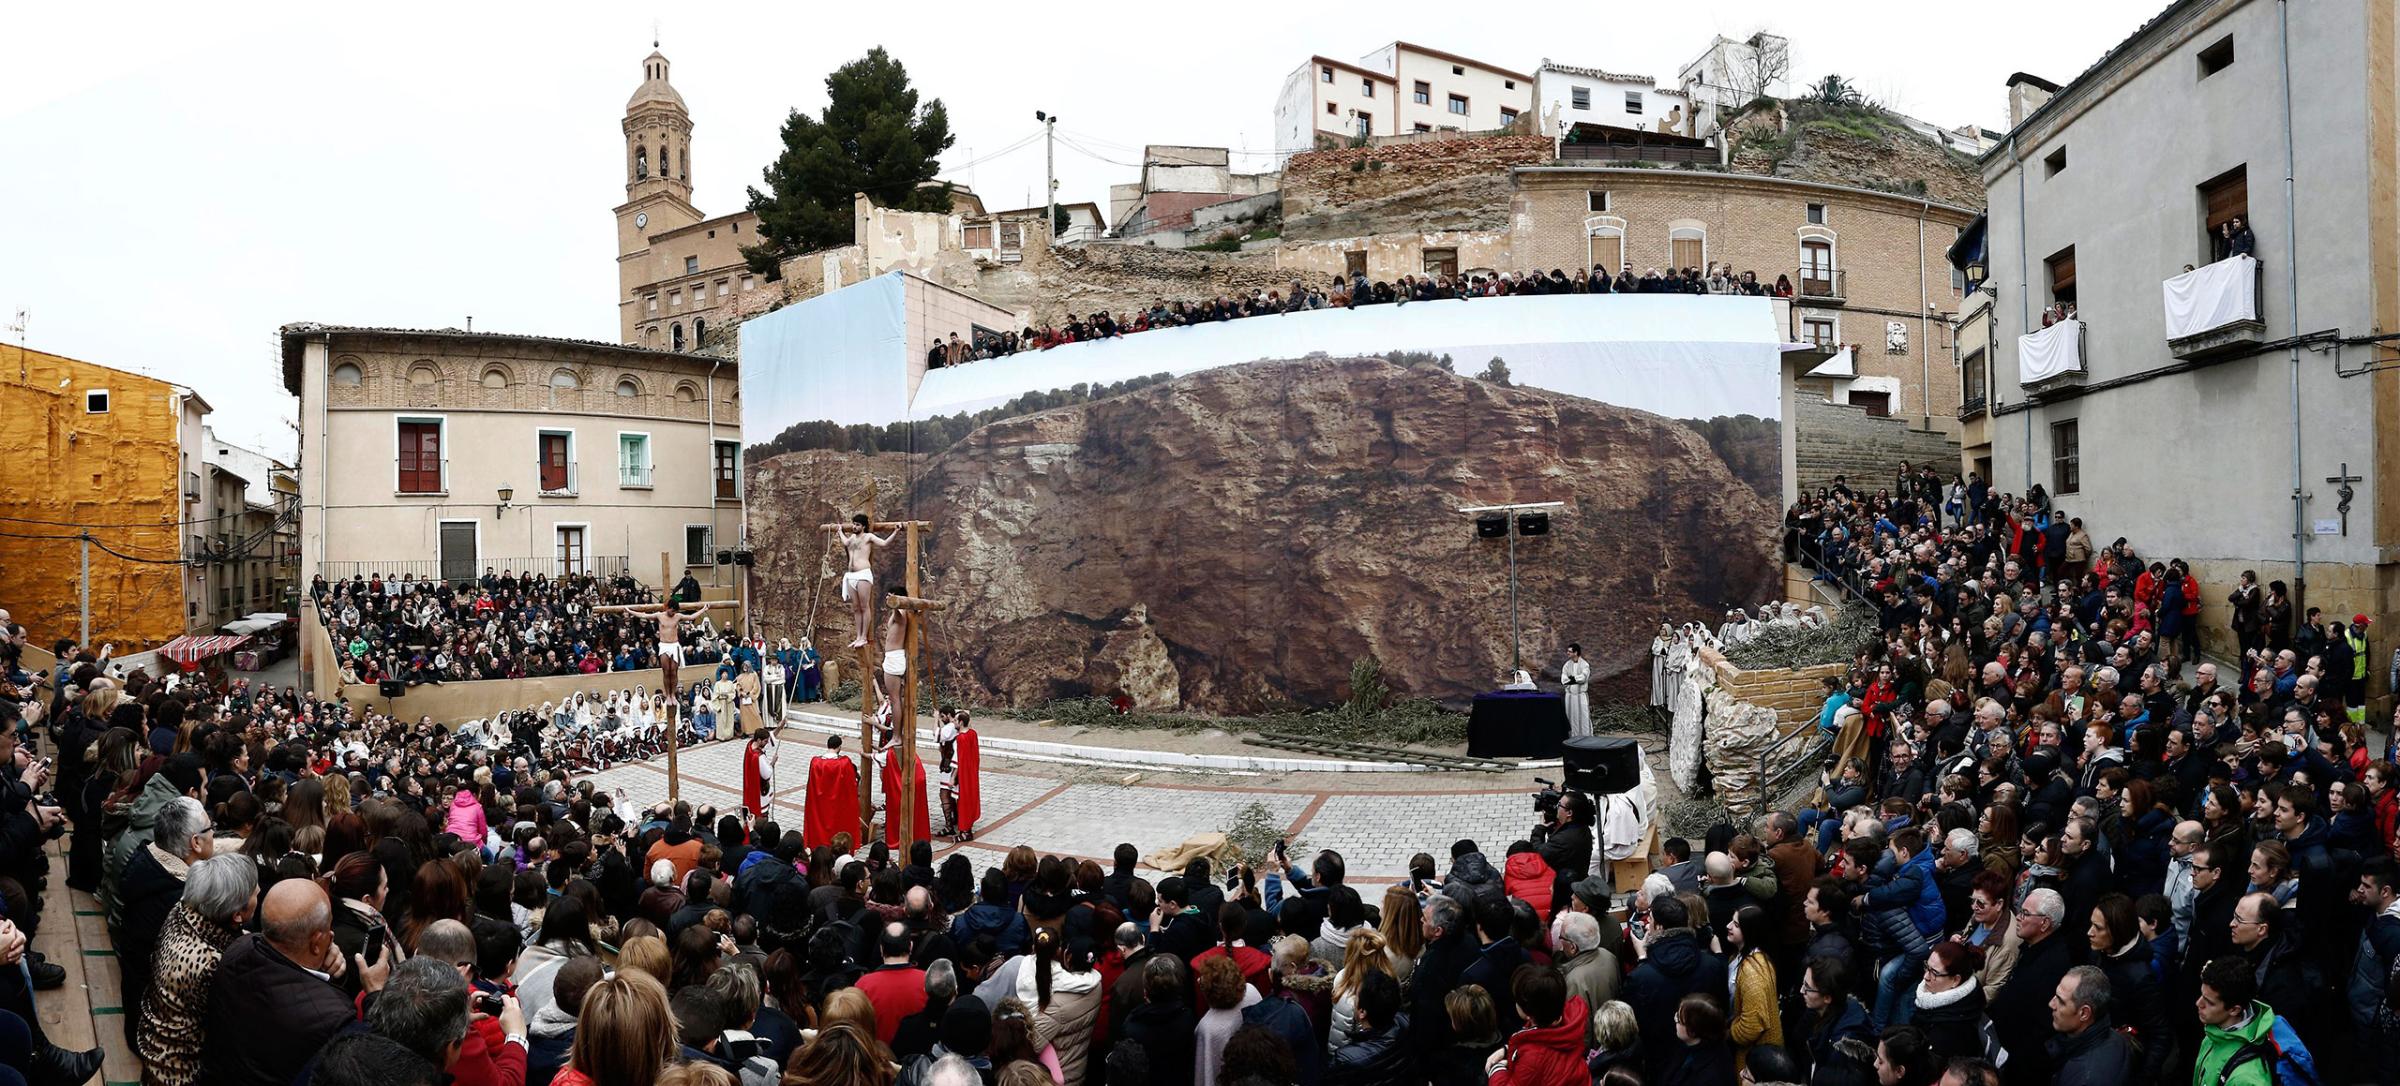 Penitents take part in the reenactment of the viacrucis at Andosilla in Navarra, Spain, March 25, 2016.